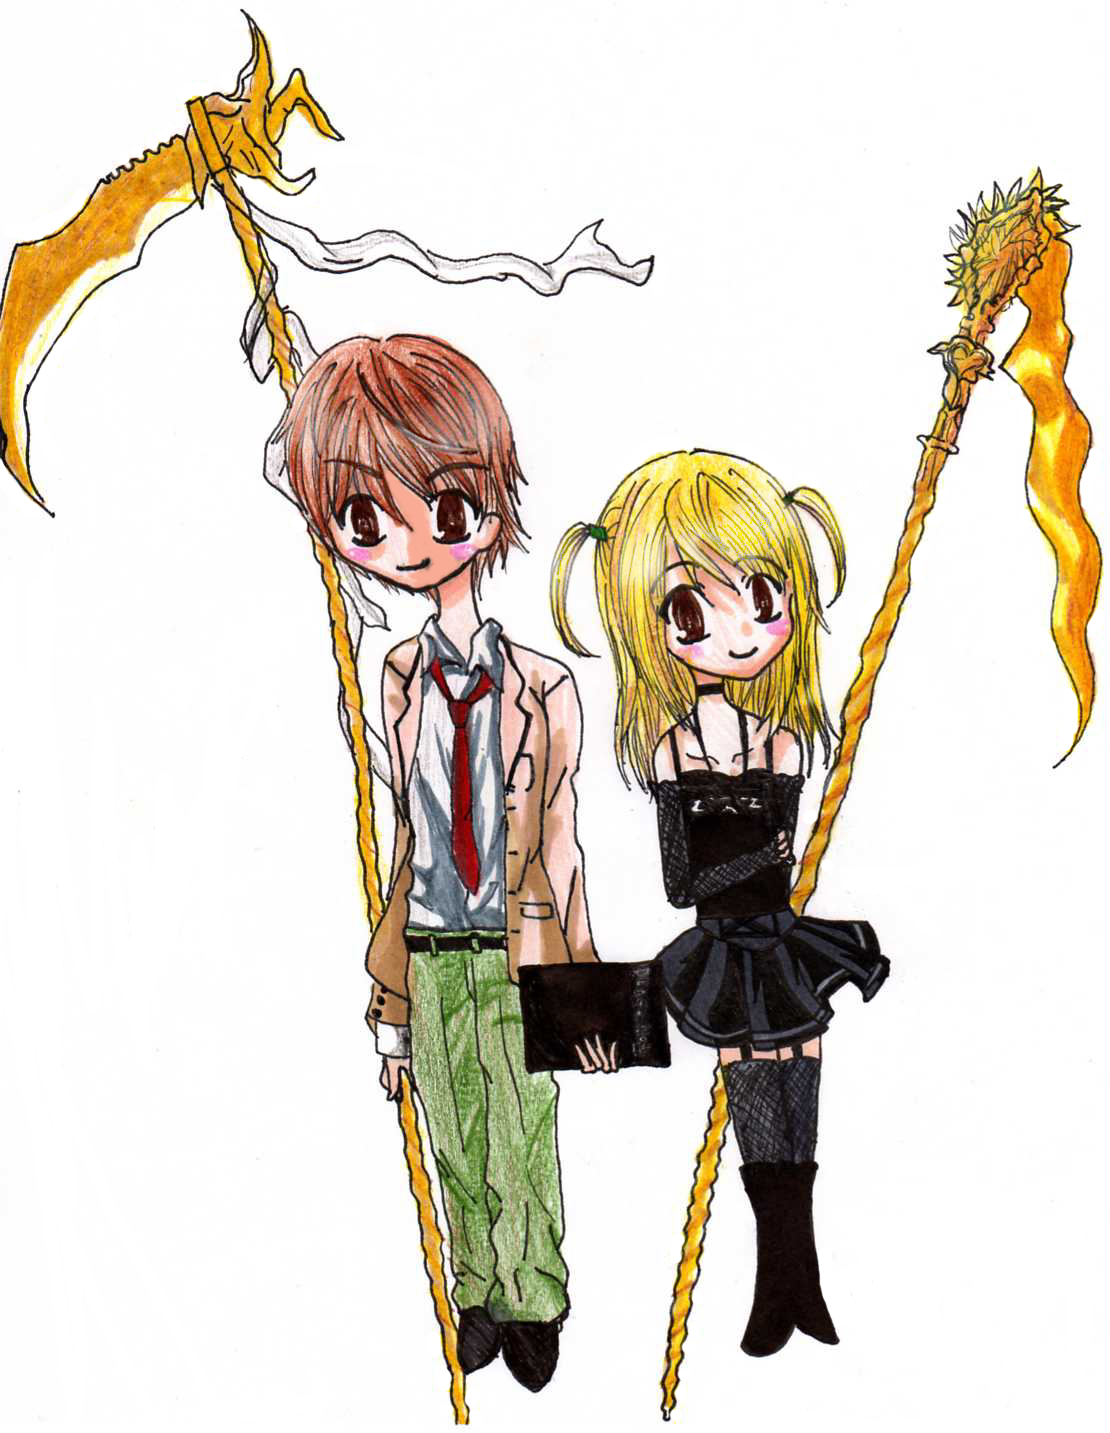 Light and Misa chibis-Death note by Haleymoon07